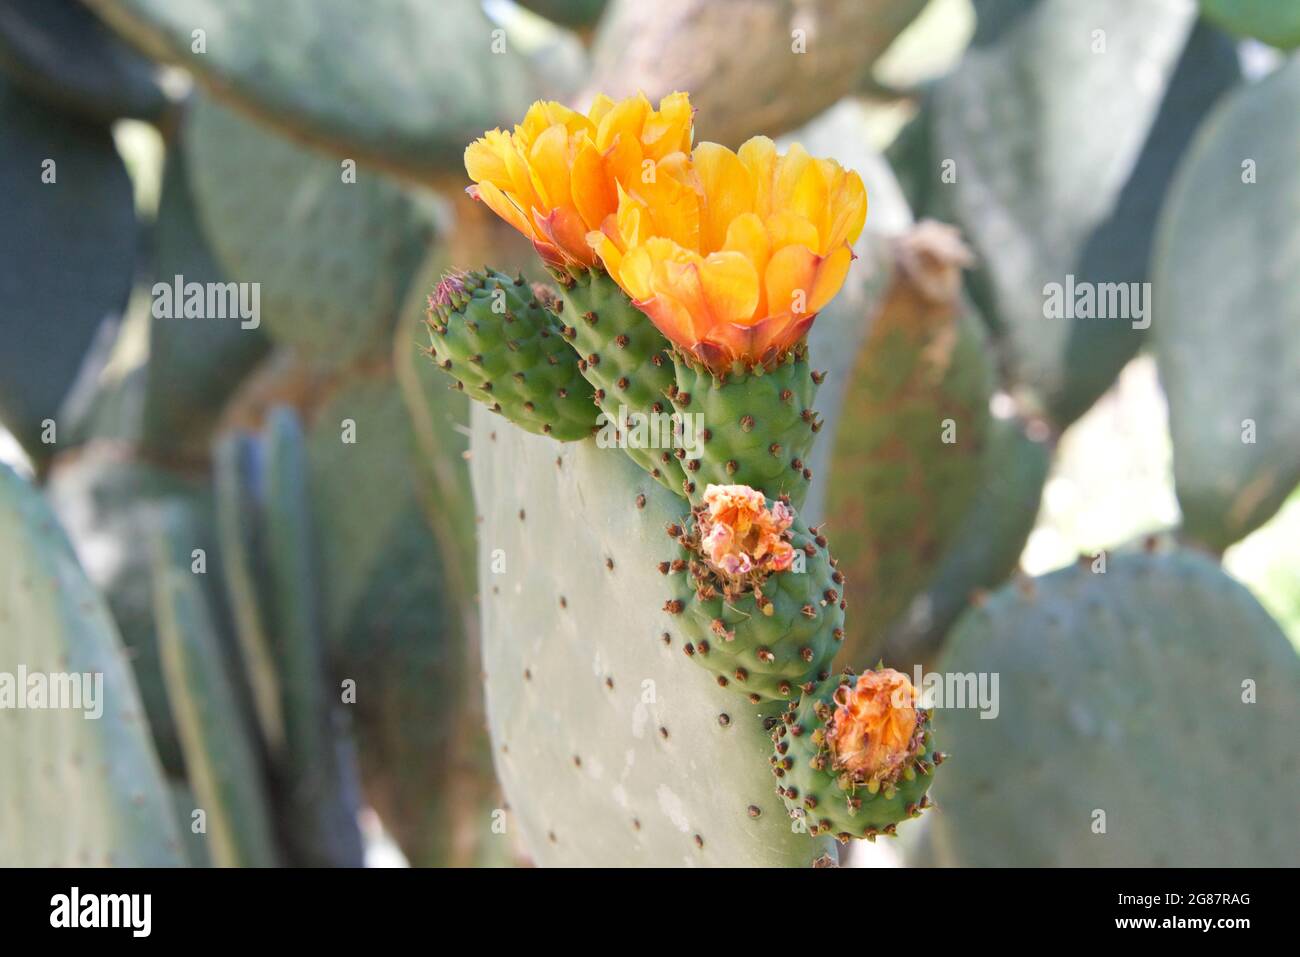 Profile view of  Prickly Pear cacti fruit with vibrant orange flowers blooming. Green prickly pear fruit under the flowers. Stock Photo